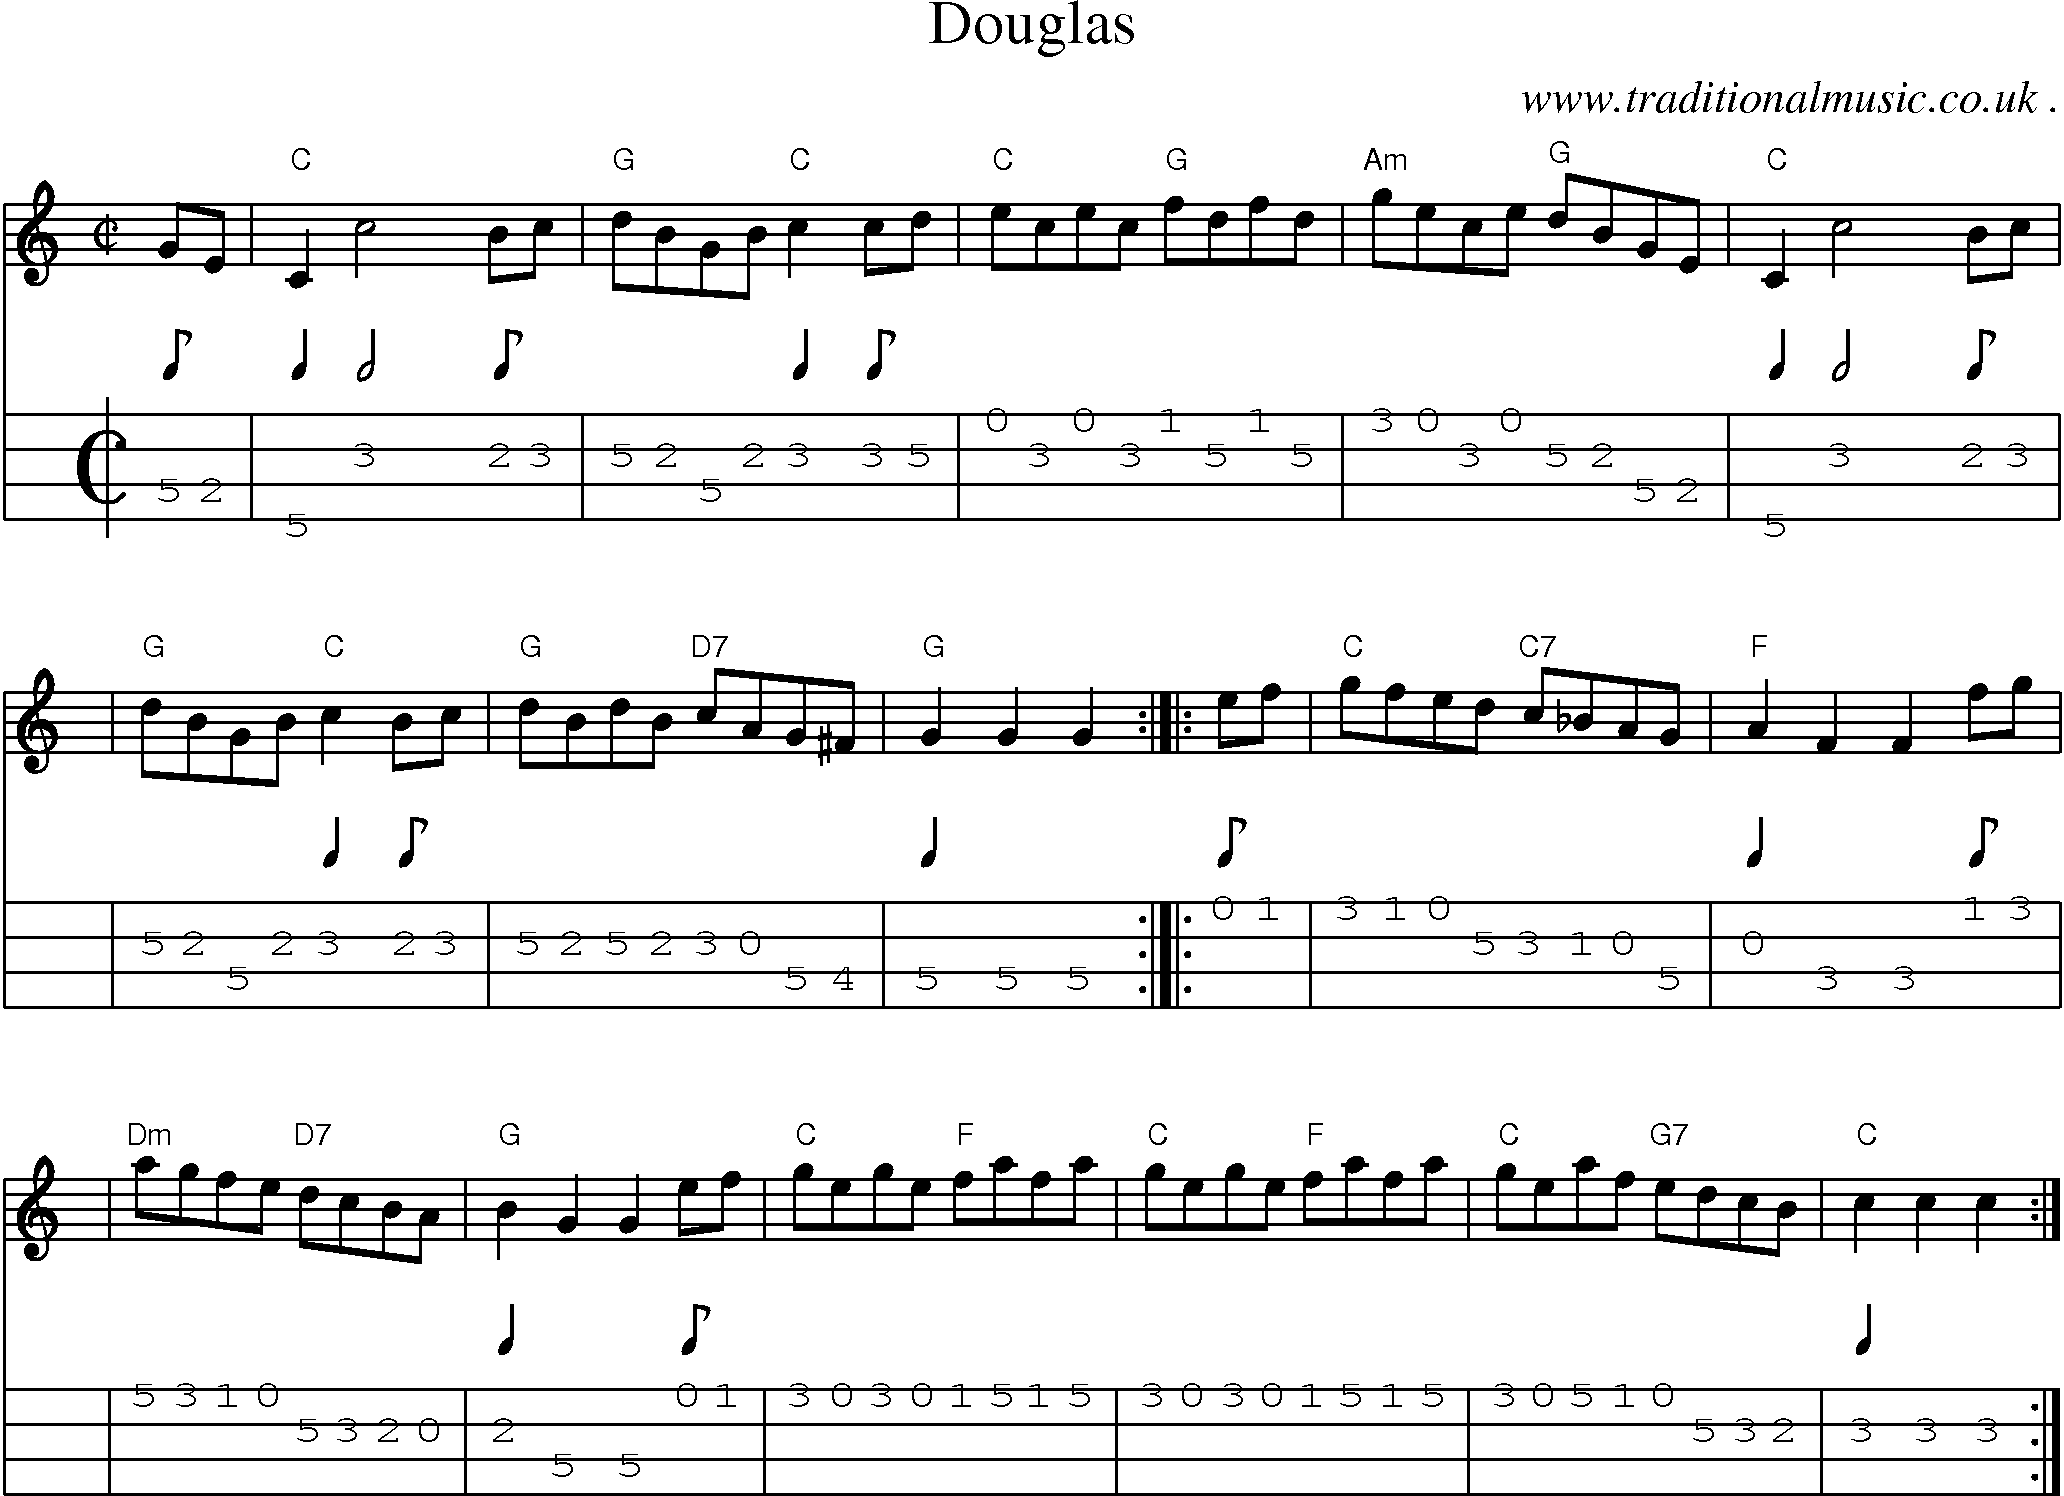 Sheet-music  score, Chords and Mandolin Tabs for Douglas